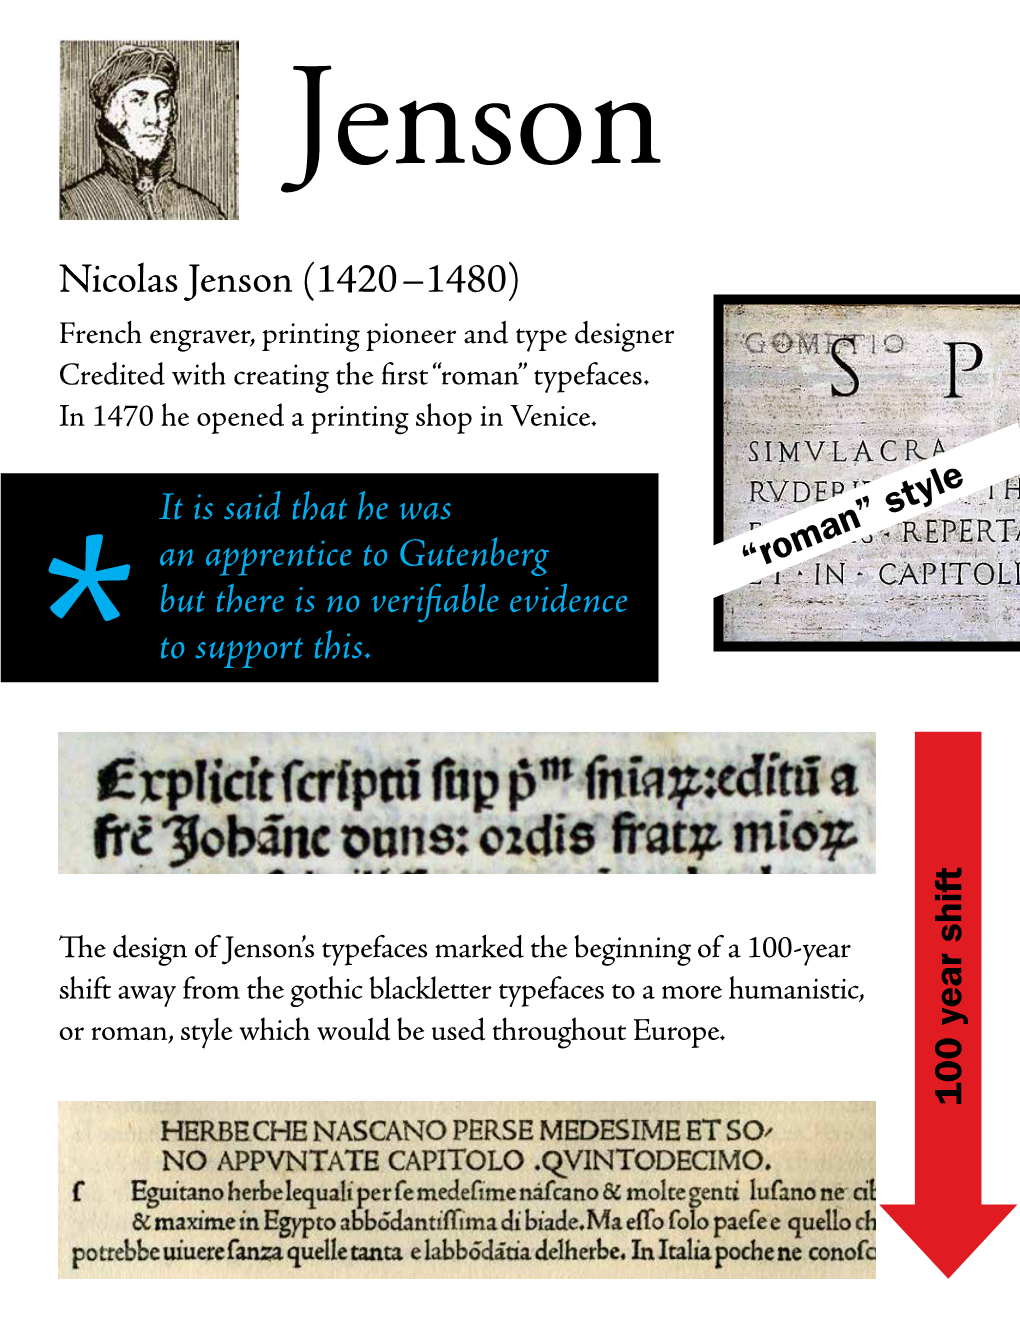 Nicolas Jenson (1420–1480) French Engraver, Printing Pioneer and Type Designer Credited with Creating the First “Roman” Typefaces